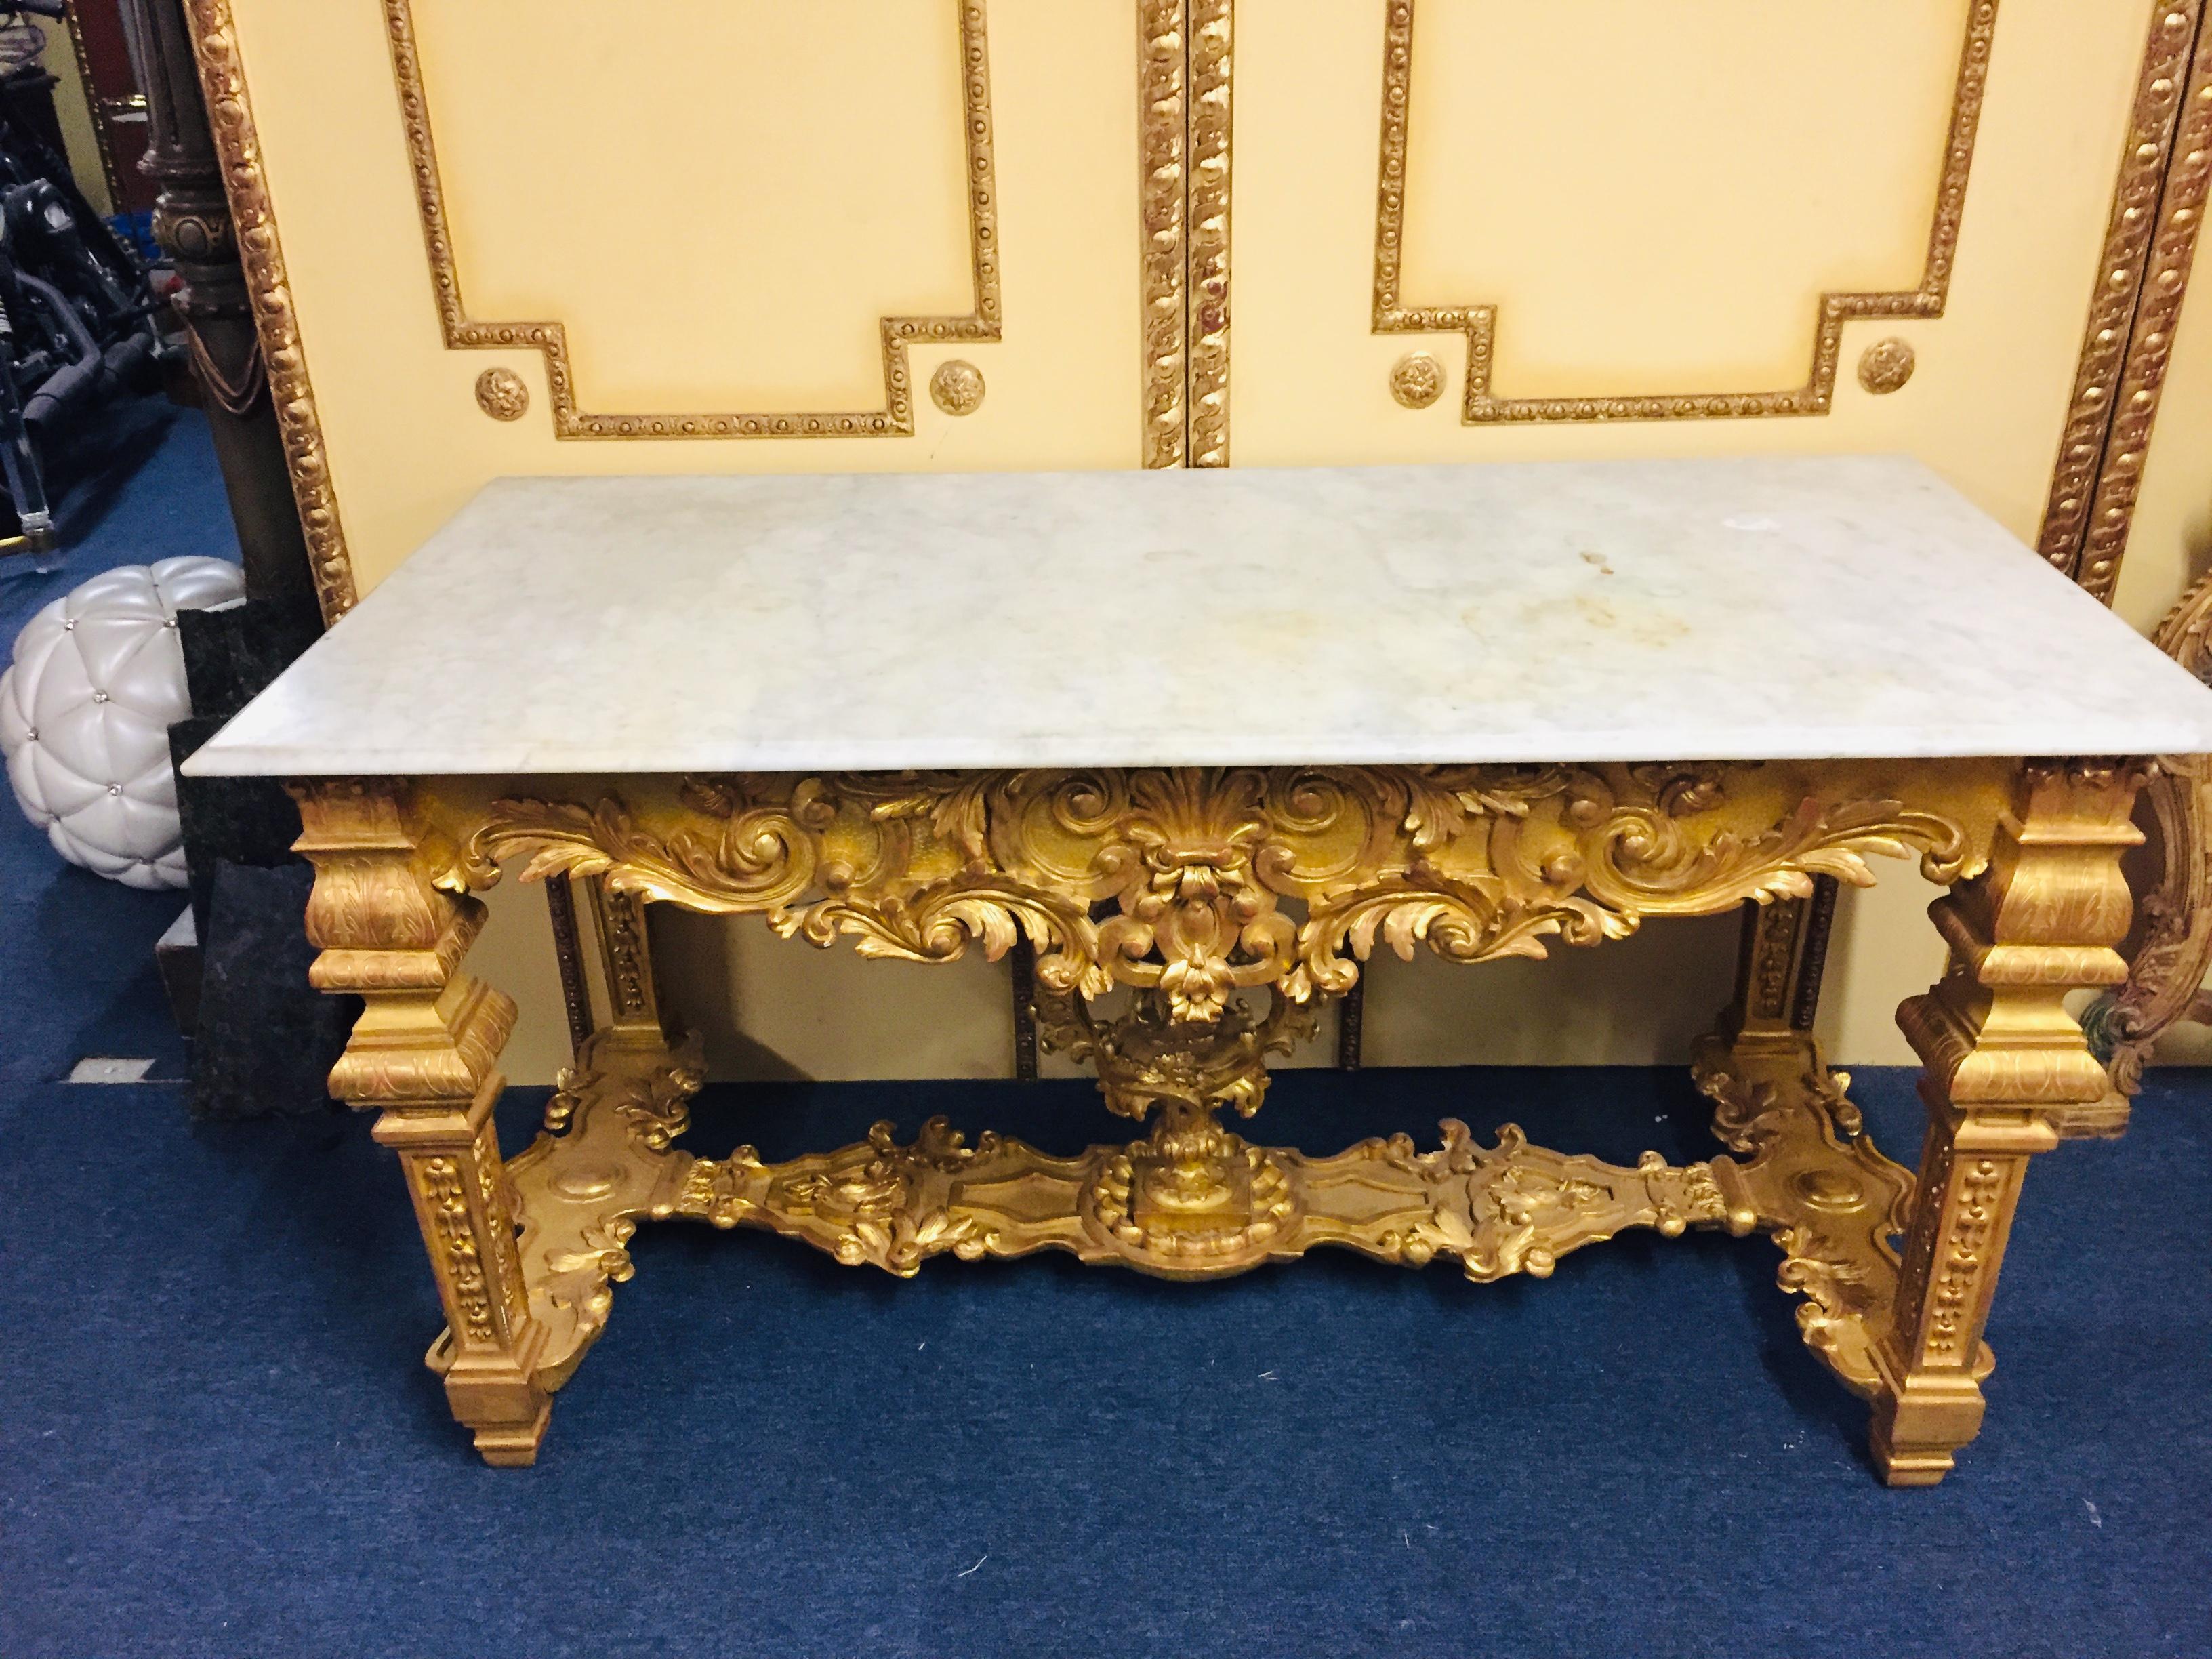 A stunning Louis XVI style gilded wood console table with nicely-carved neoclassical details, including wreath and tapered fluted legs, circa 1900. Console table has a White Marble top 
An extremely elegant French 19th century Louis XVI st.